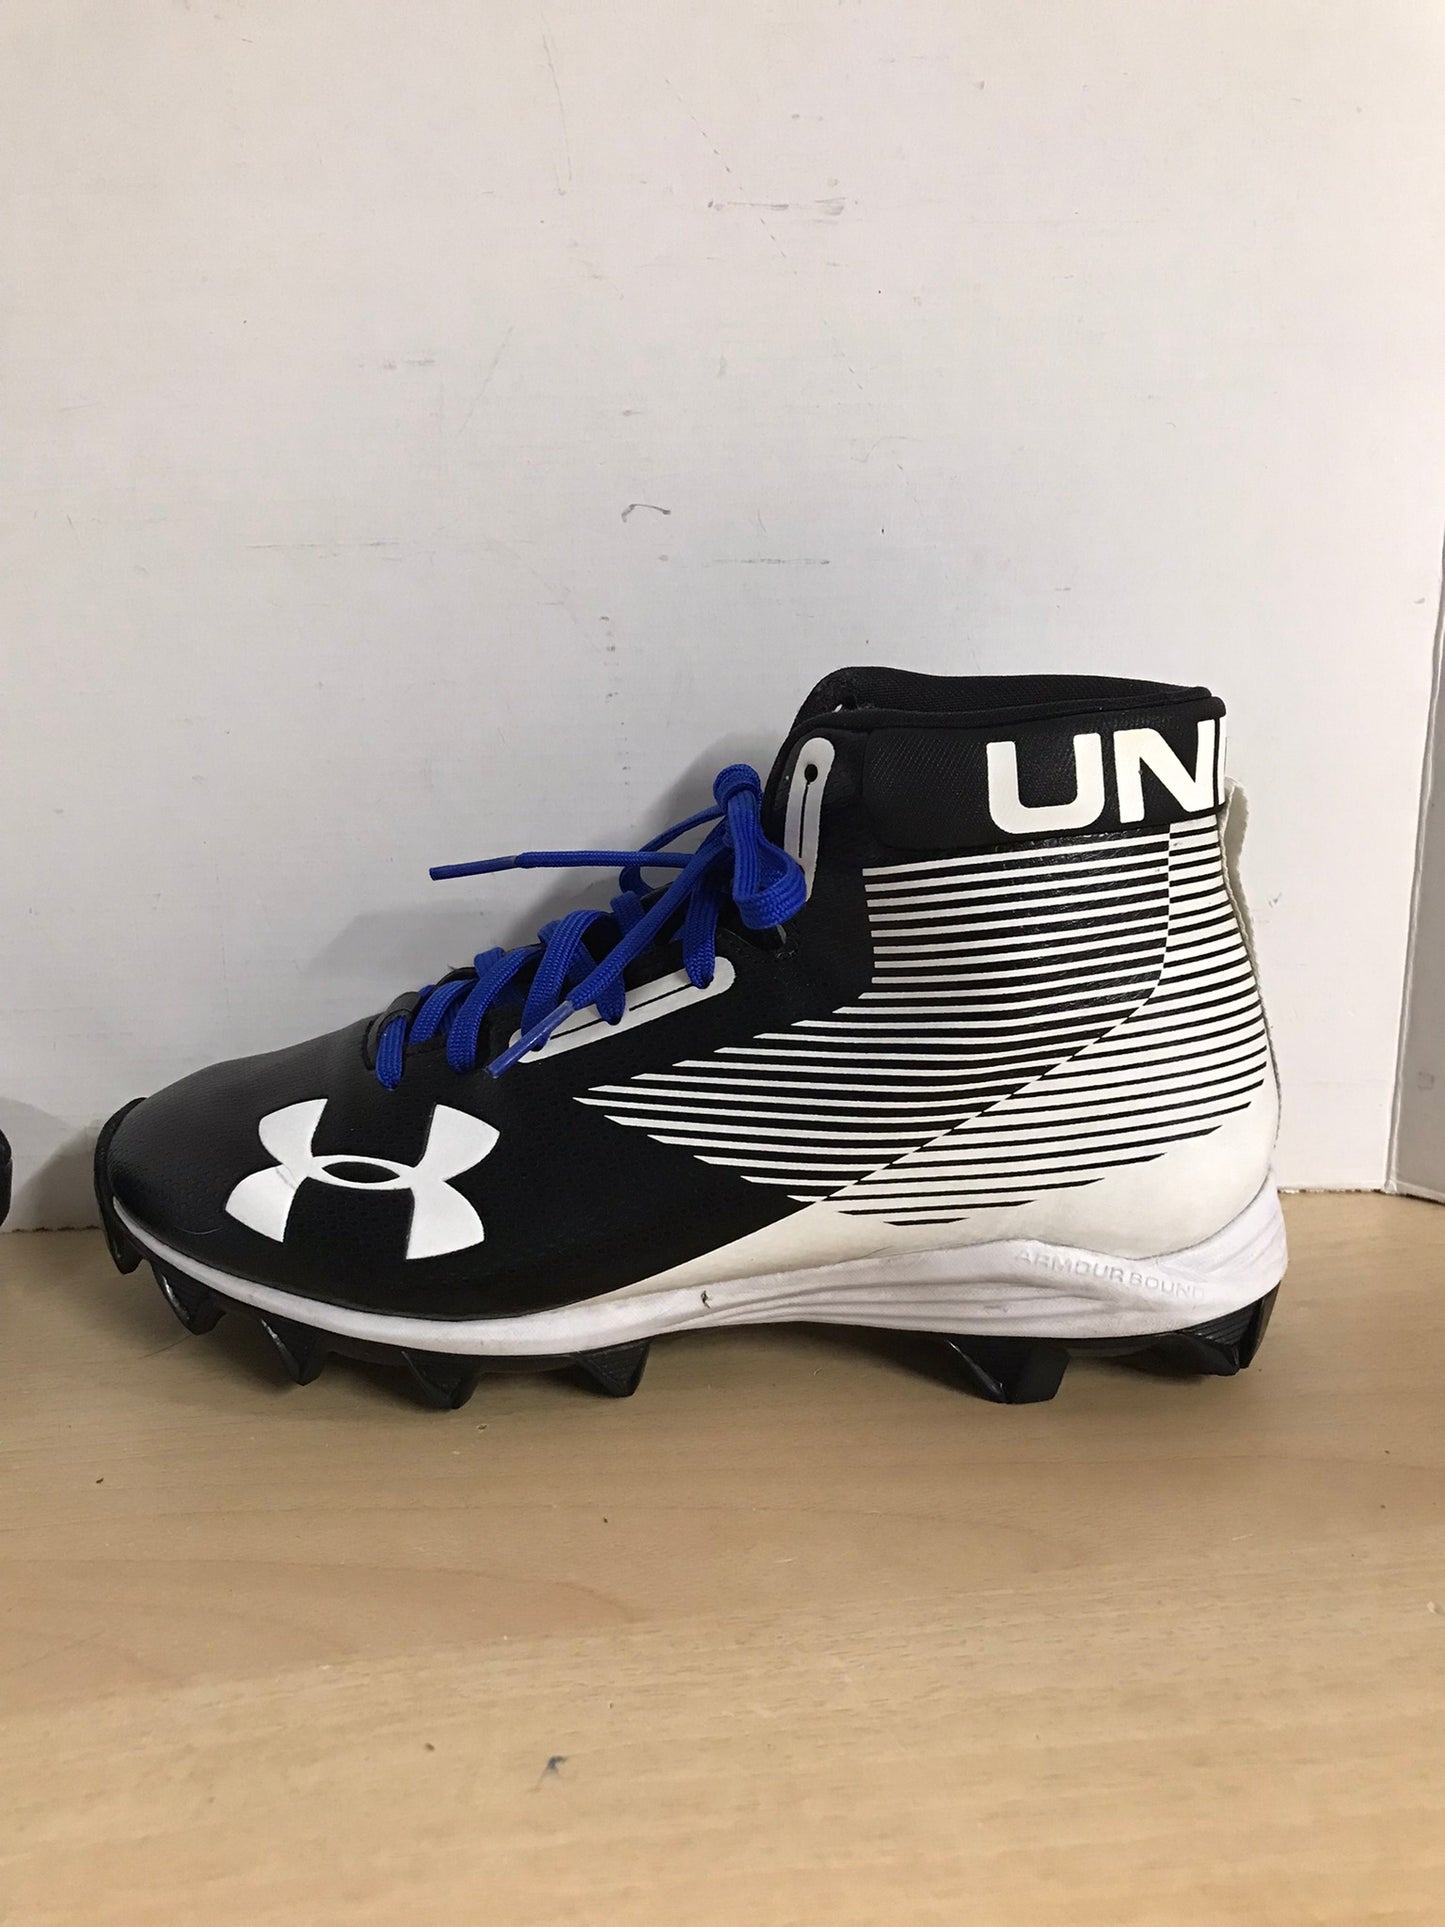 Baseball Shoes Cleats Child Size 5.5 Under Armor High Top Black White Blue As New